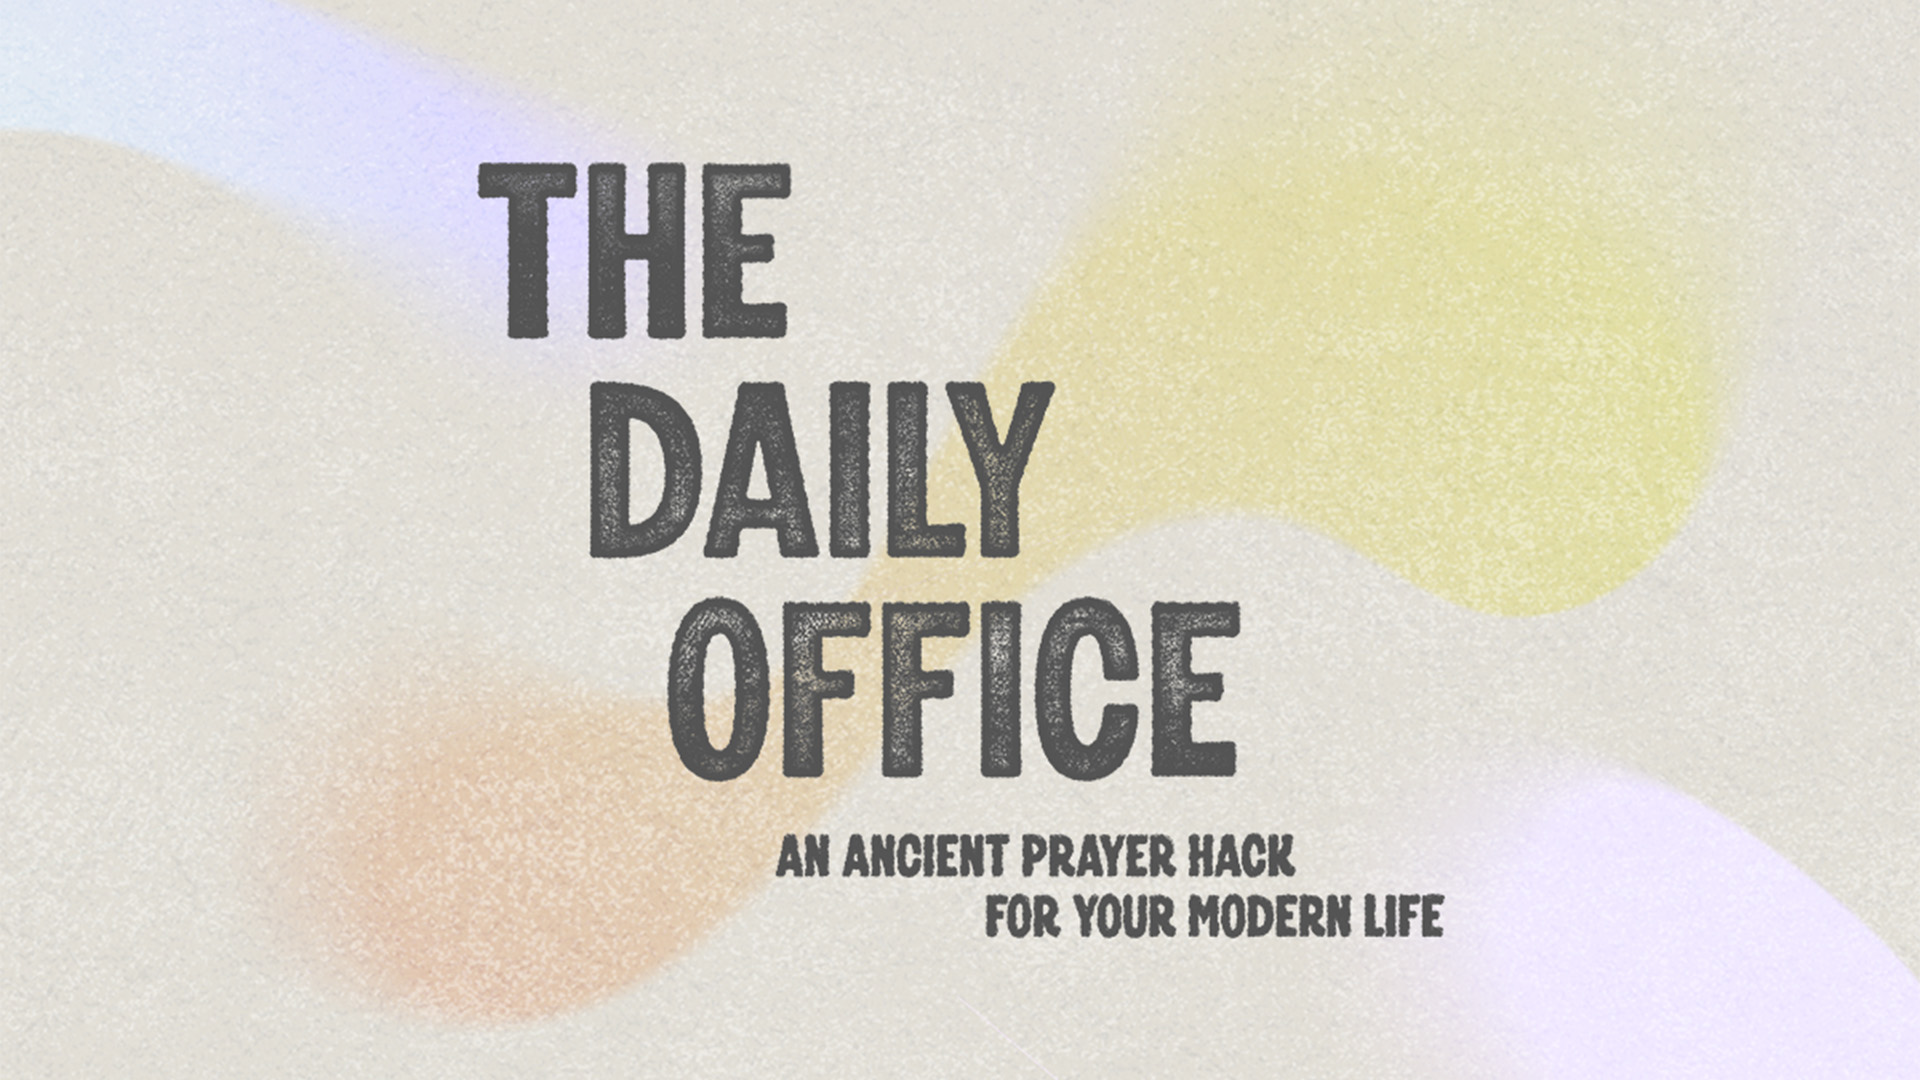 The Daily Office: An Ancient Prayer Hack for Your Modern Life